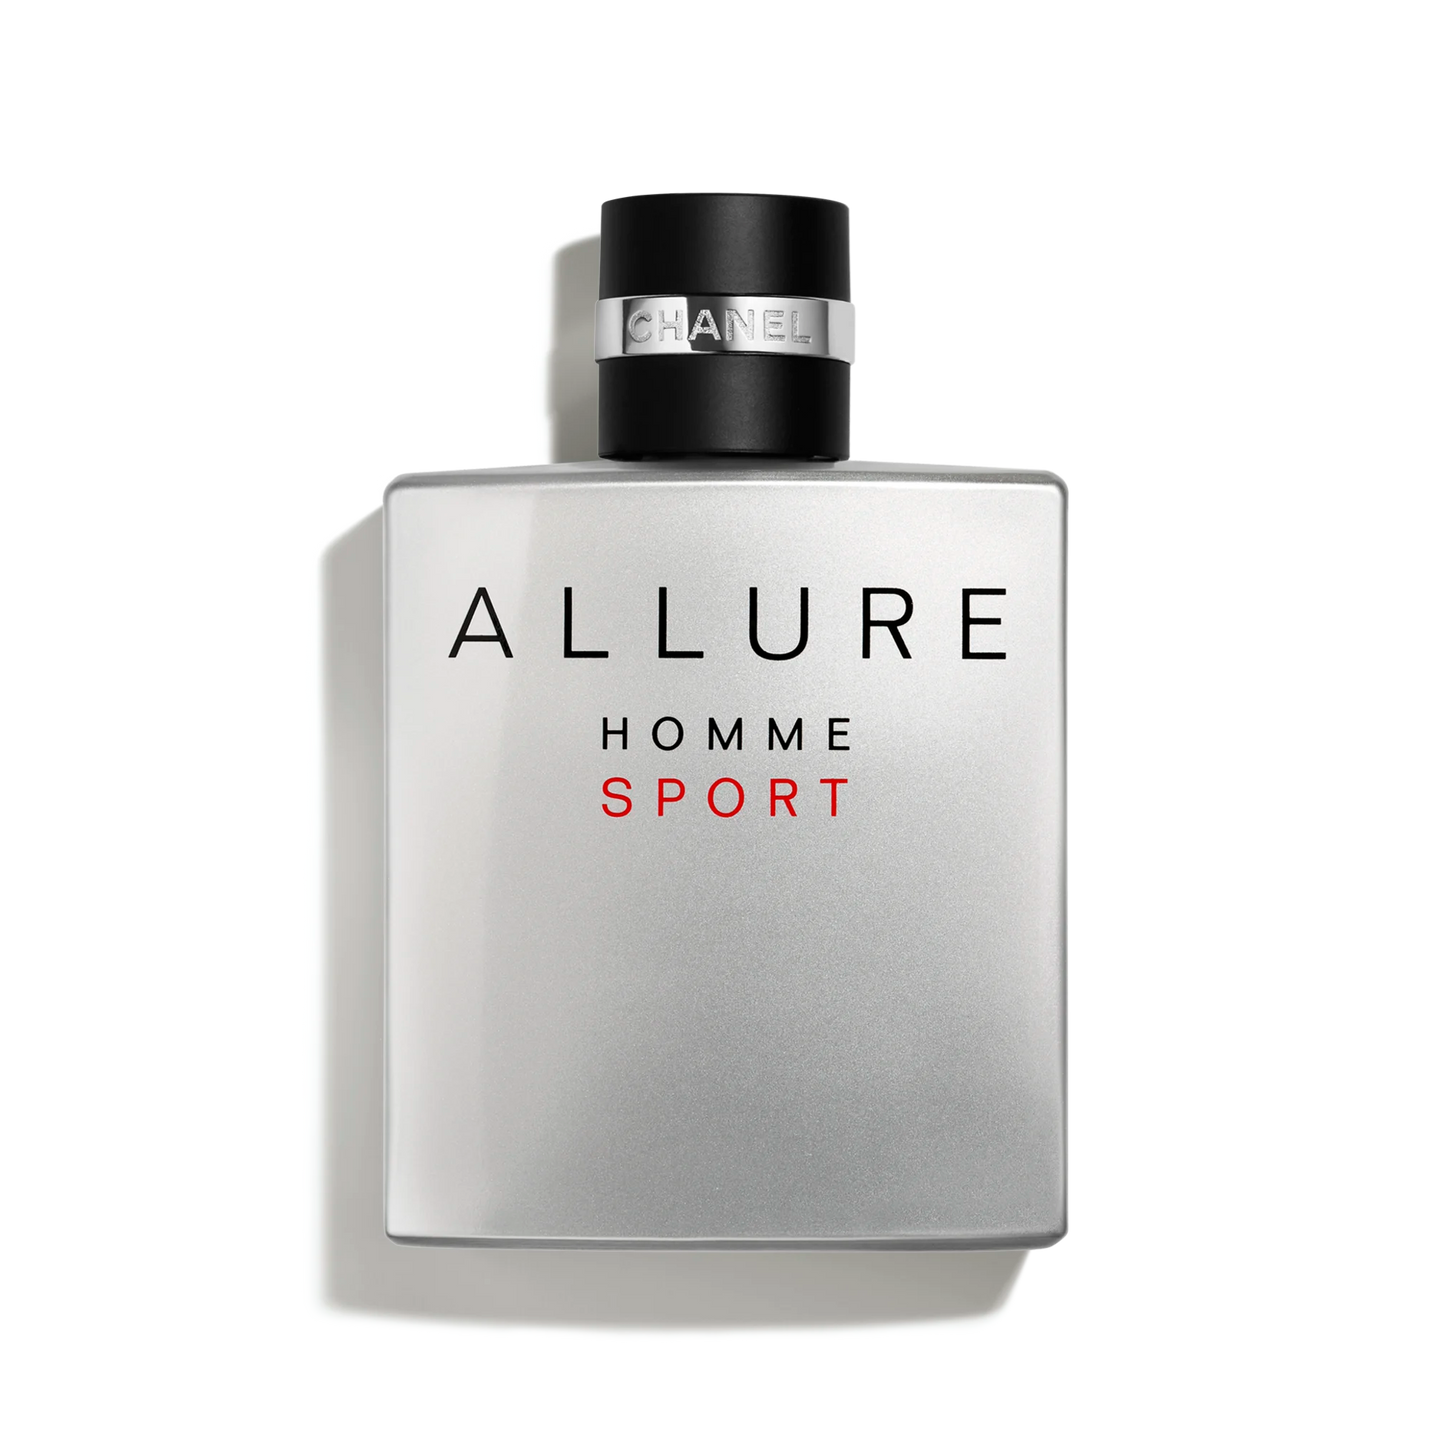 ALLURE ( Chanel )( Homme Sport )